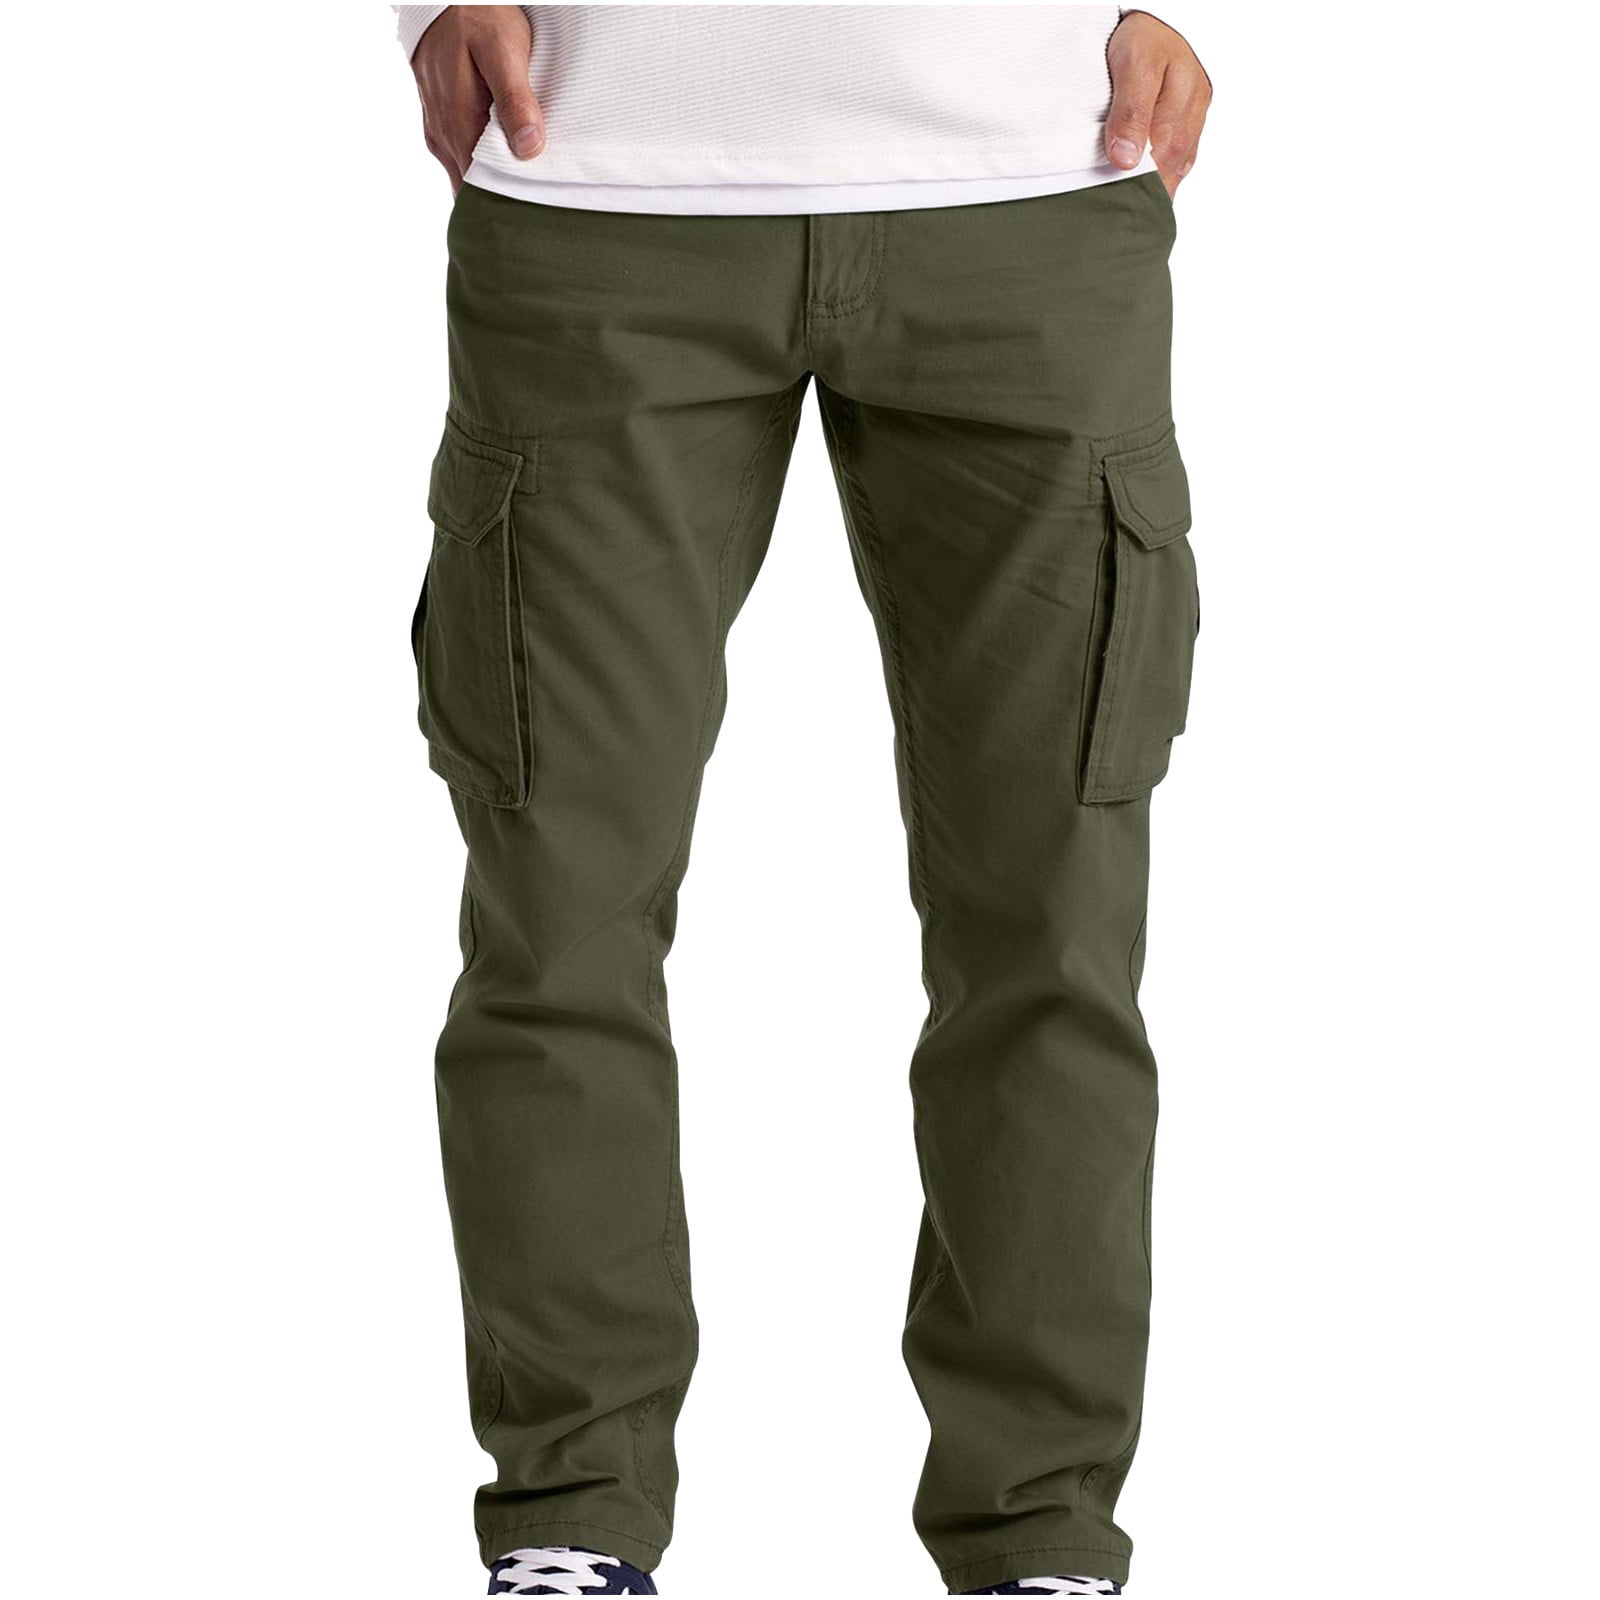 ZKCCNUK Cargo Pants for Men's Cargo Trousers Work Wear Combat Safety Cargo  6 Pocket Full Pants Navy M on Clearance 